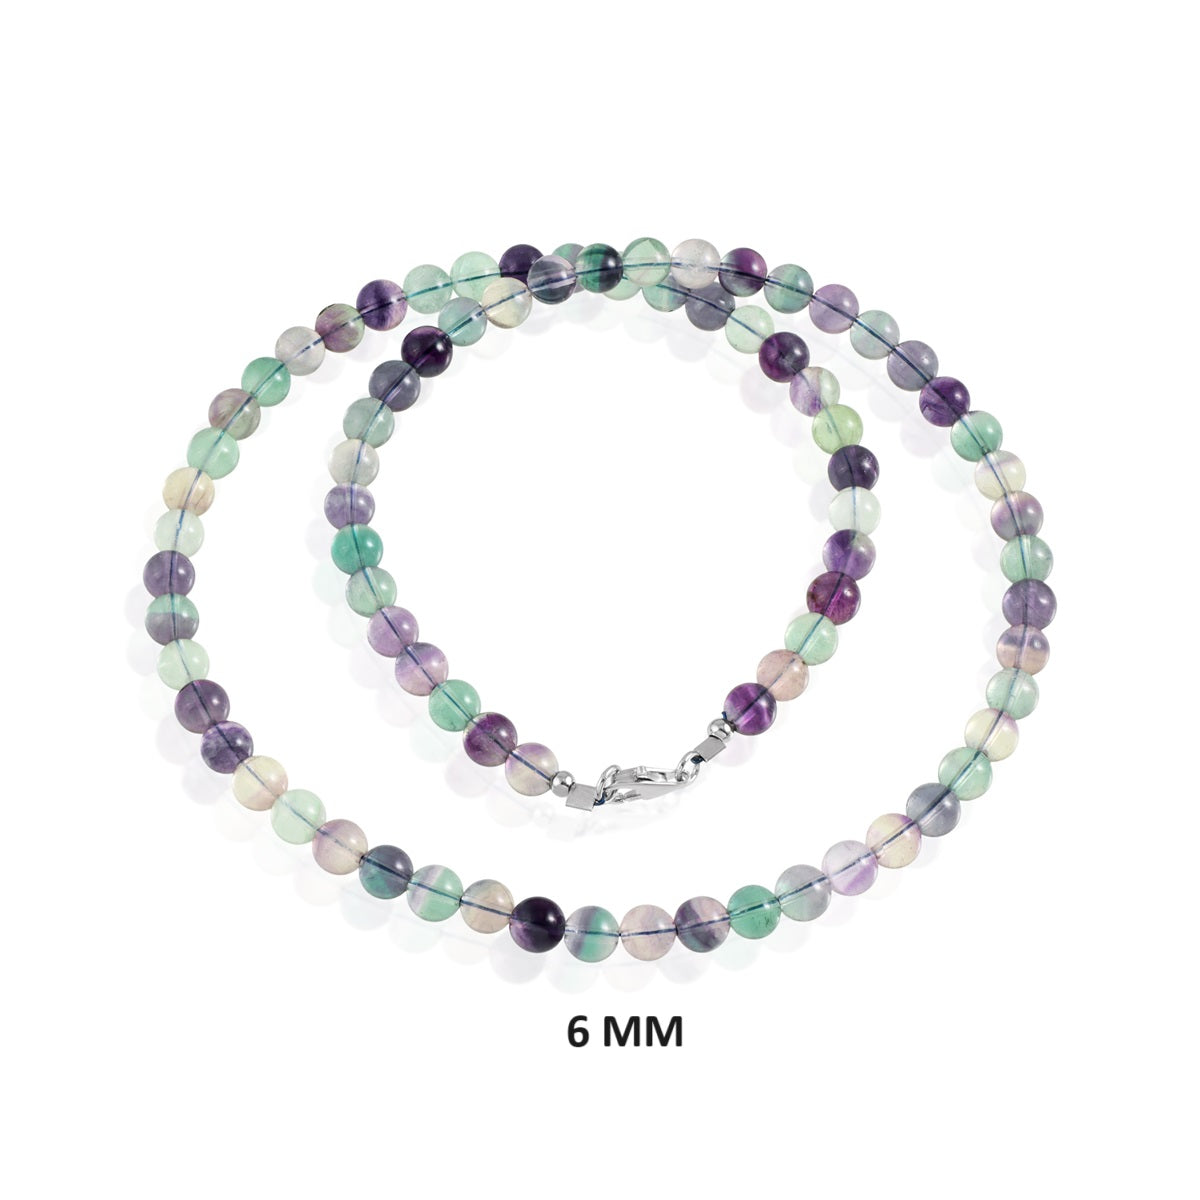 Fluorite Beads Silver Necklace: Clarity and Sophistication